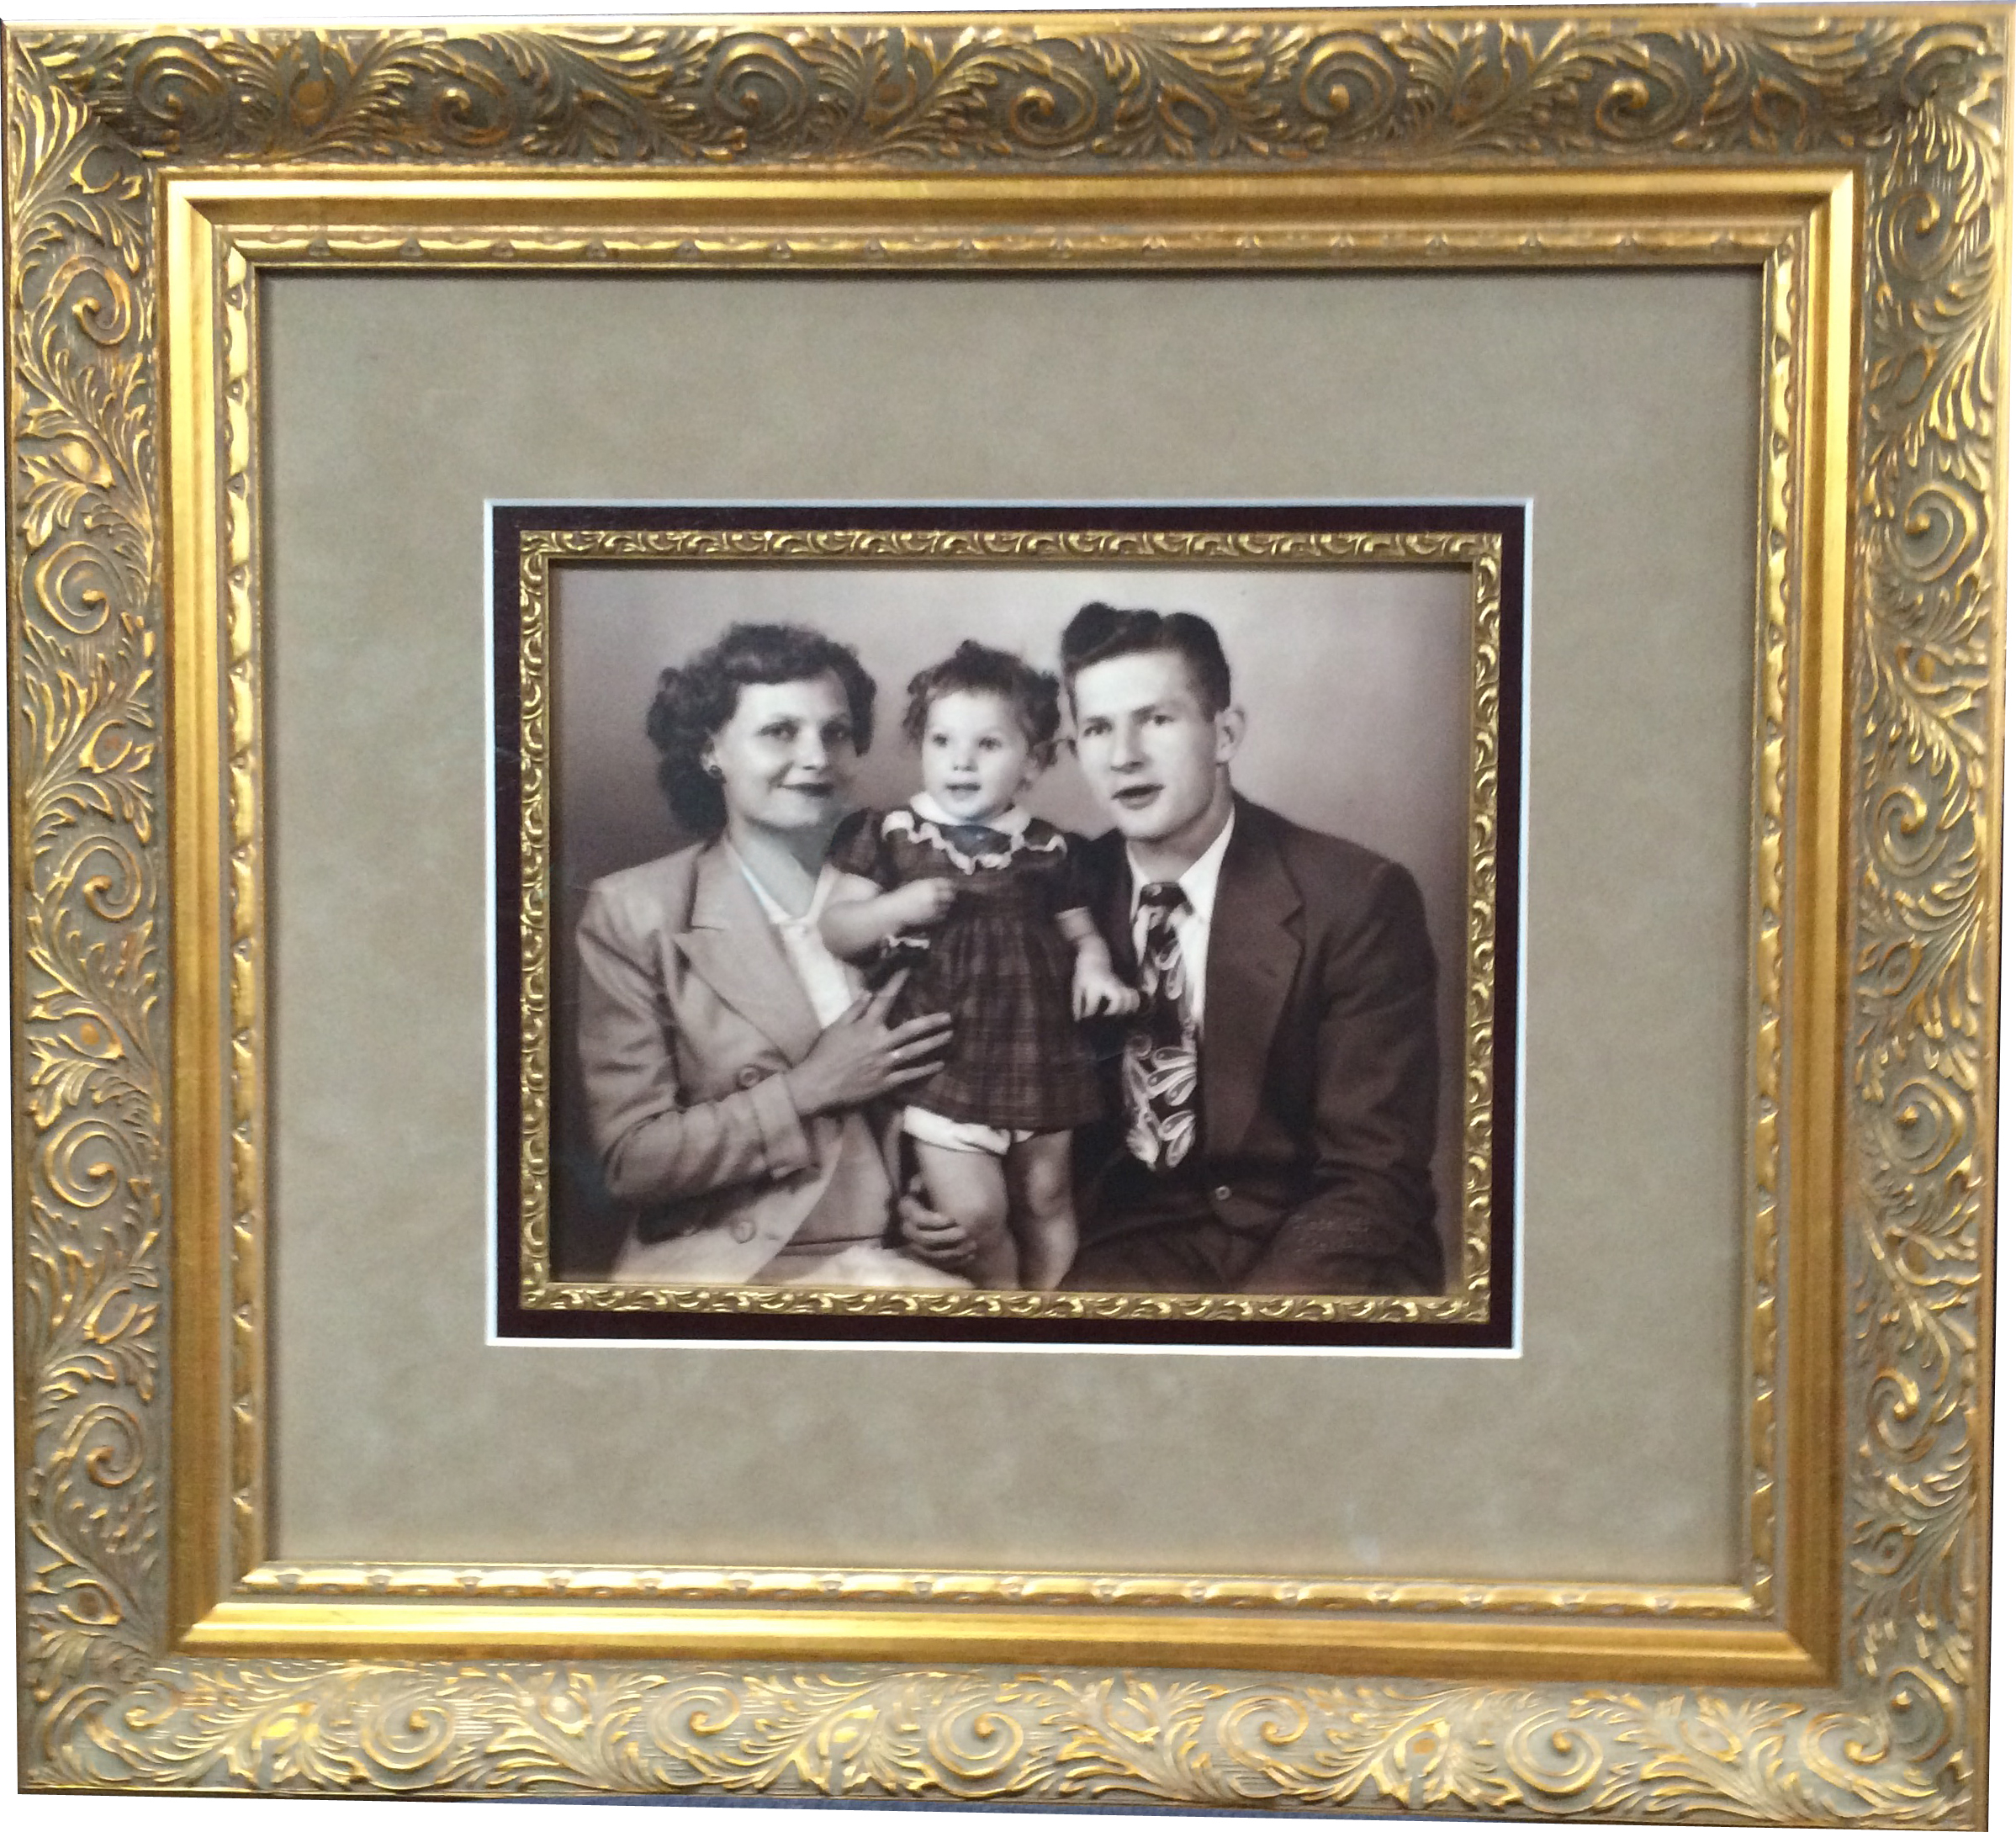 Framed Family Portrait Terry's Custom Framing and Art Gallery Conway (843)248-3541